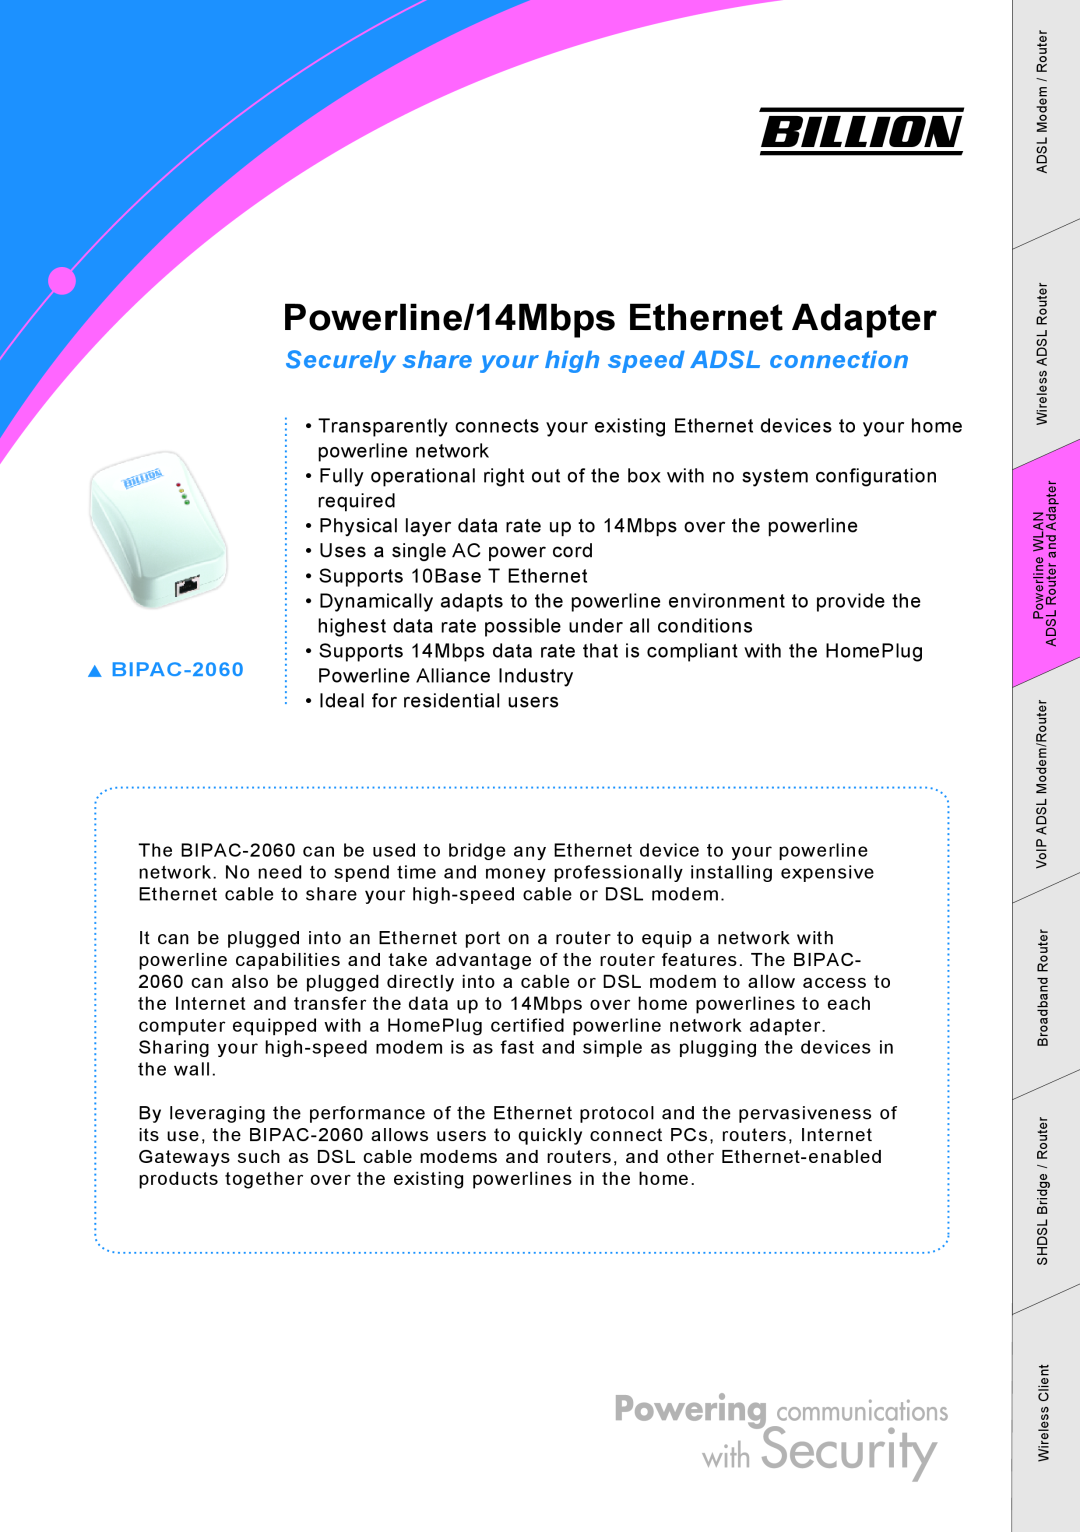 Billion Electric Company BIPAC-2060 manual Powerline/14Mbps Ethernet Adapter, Powerline Alliance Industry 